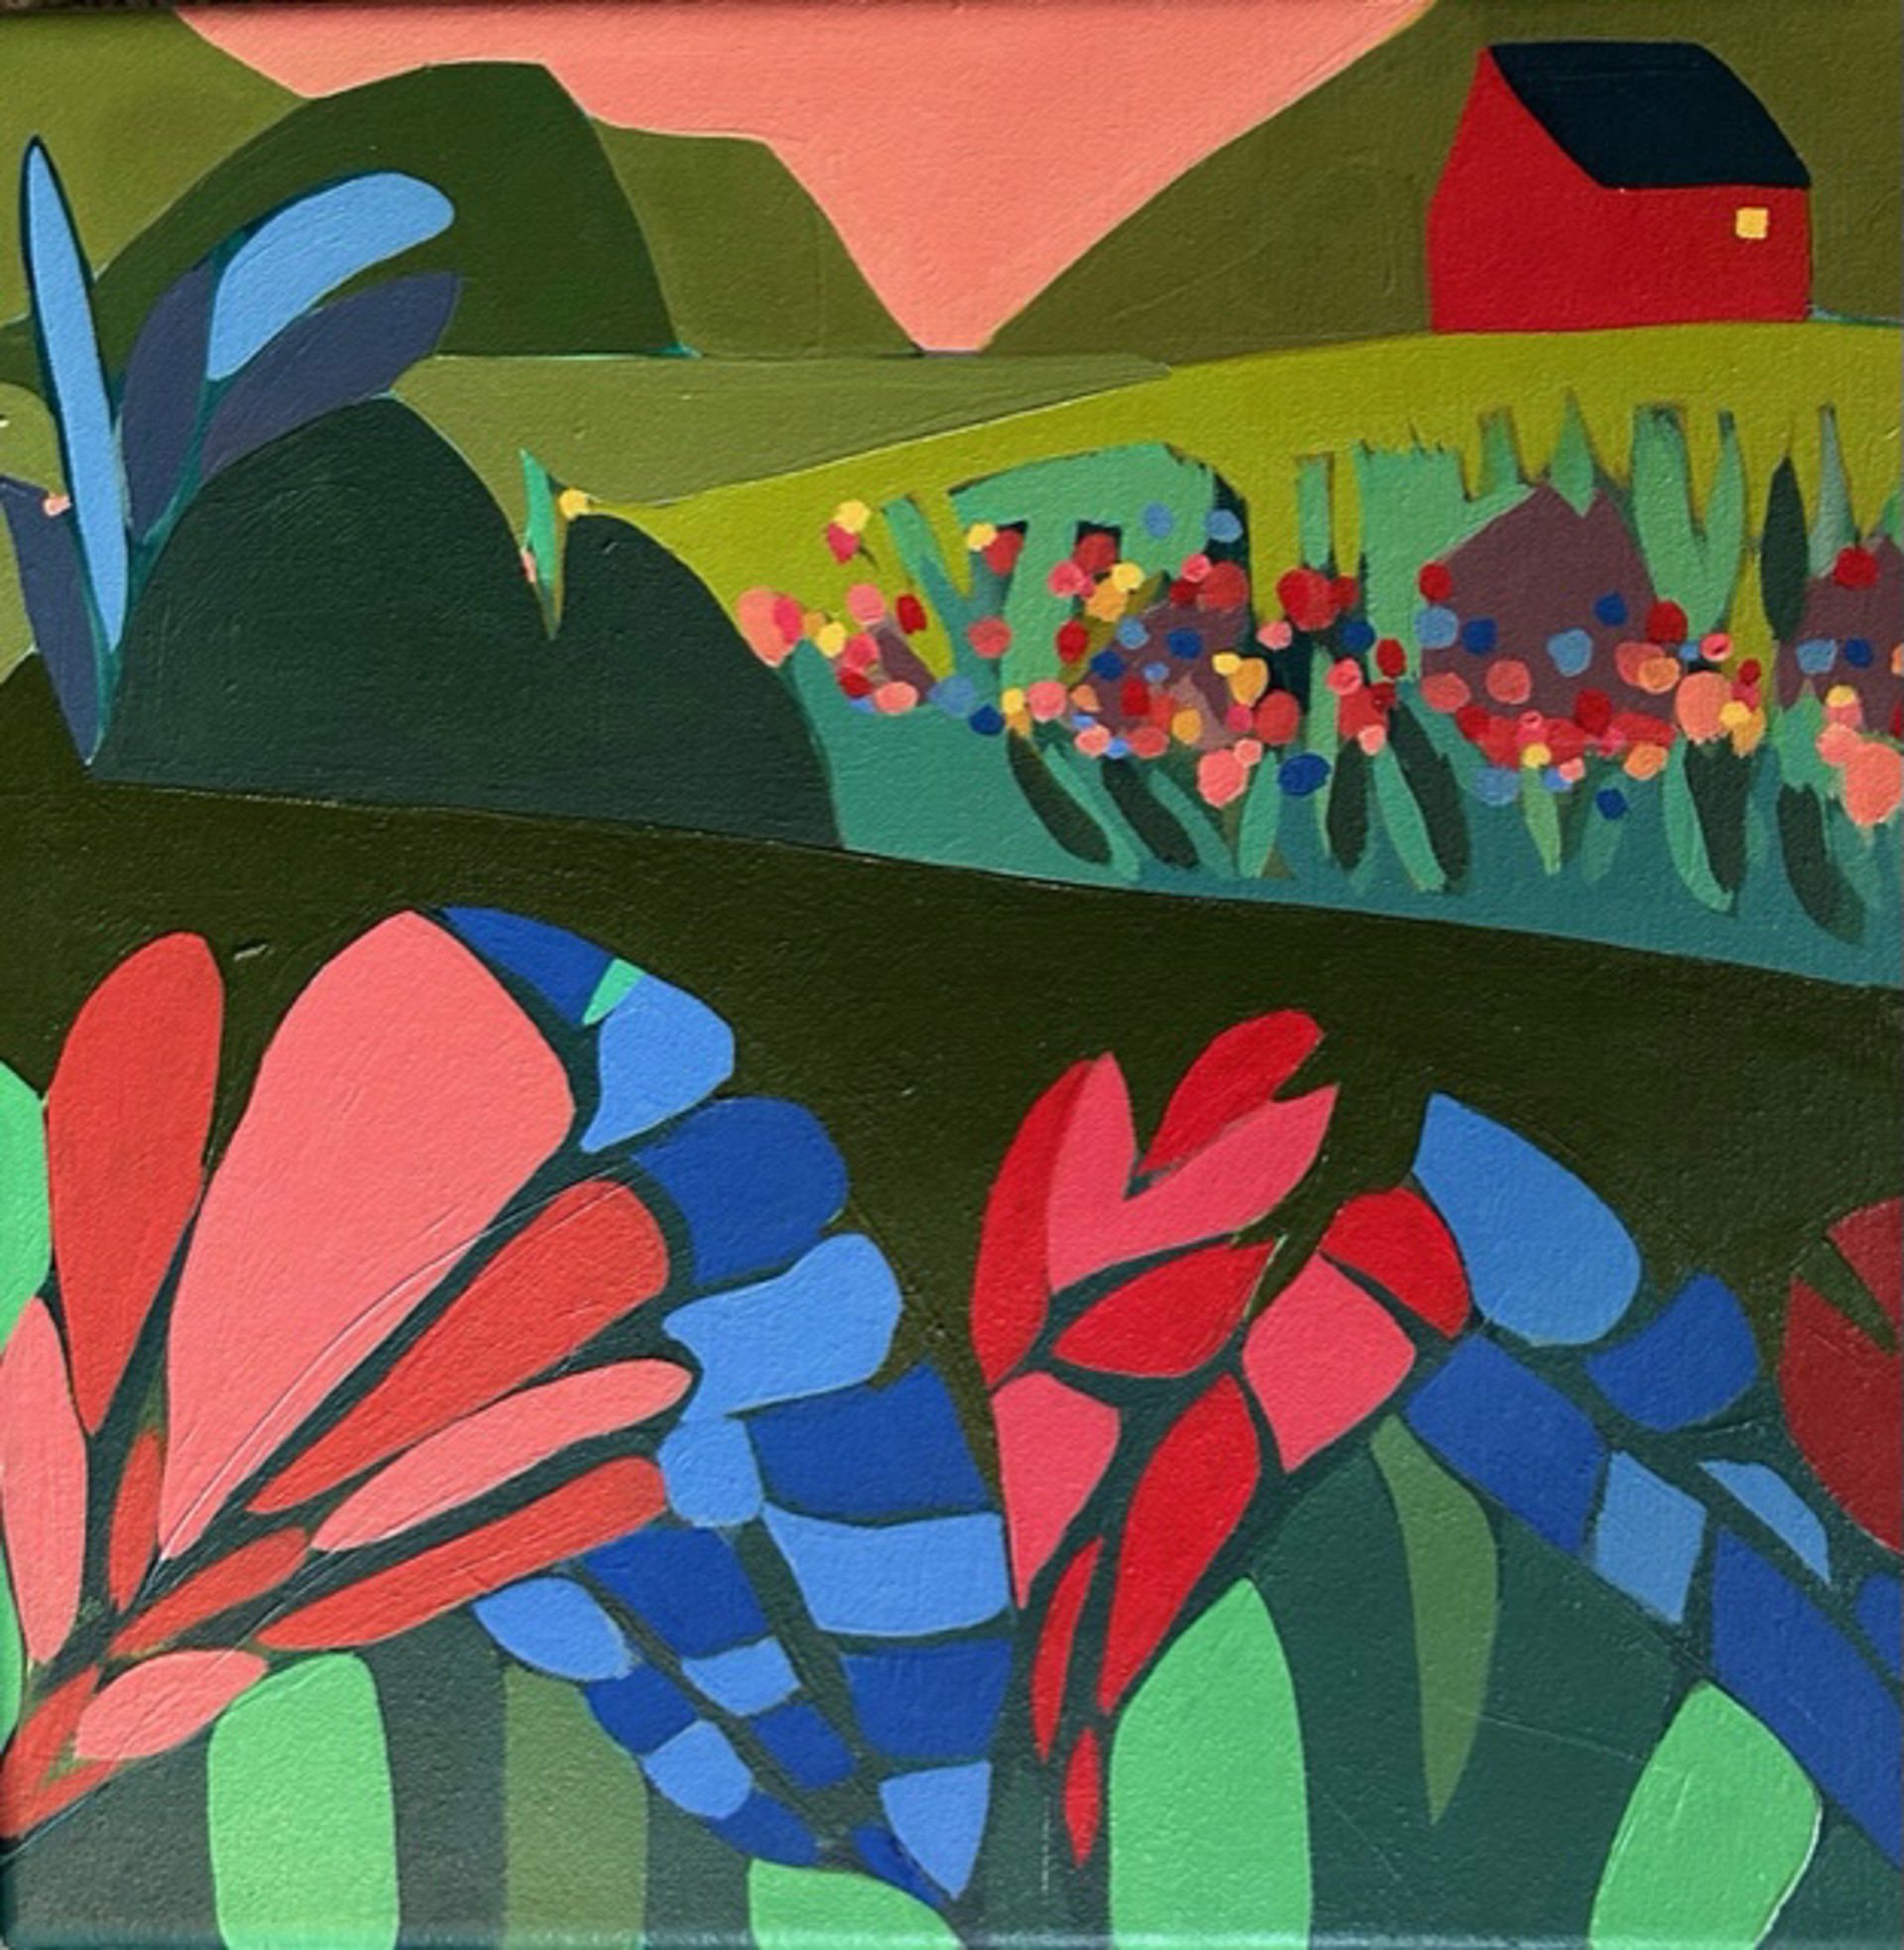 Red Barn with Large Red and Blue Flowers by Sage Tucker-Ketcham